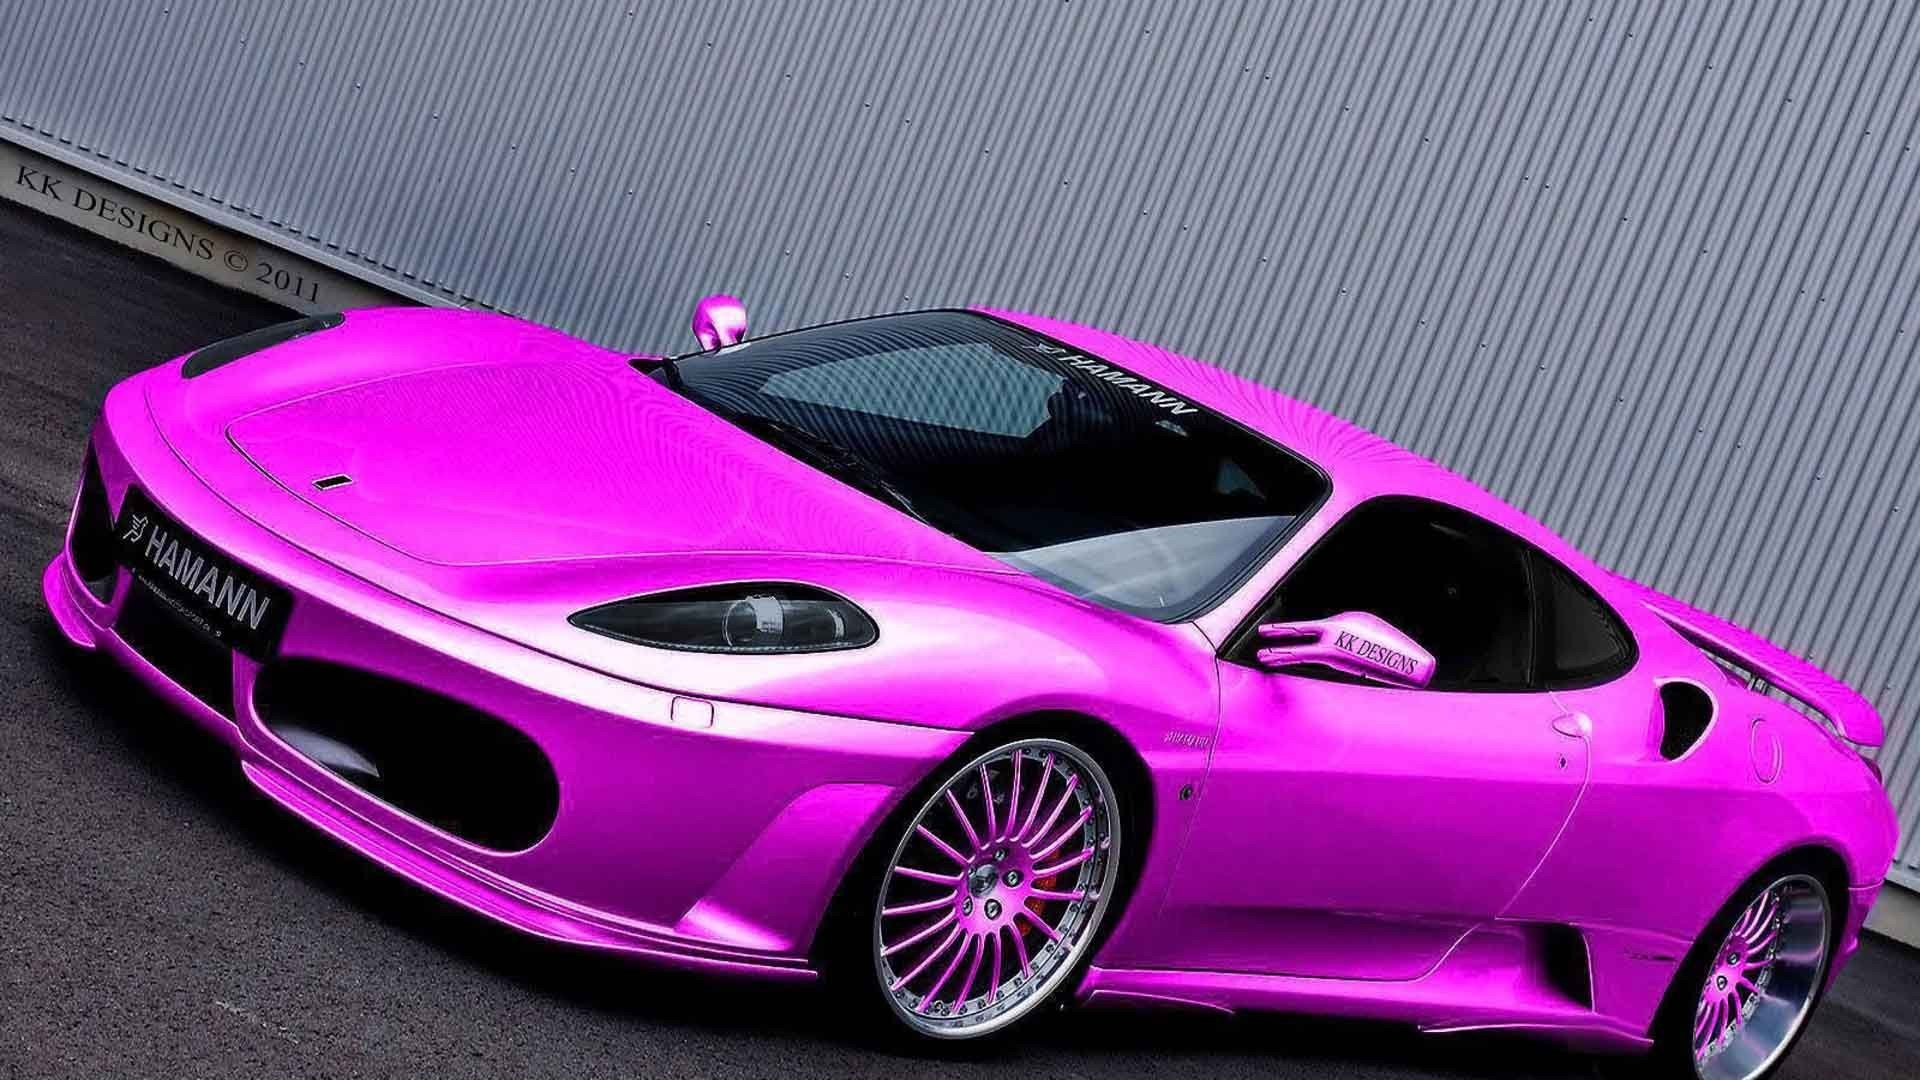 Fast Speed Cool Cars Wallpapers Download For Free - Ferrari Cars Pink Color - HD Wallpaper 